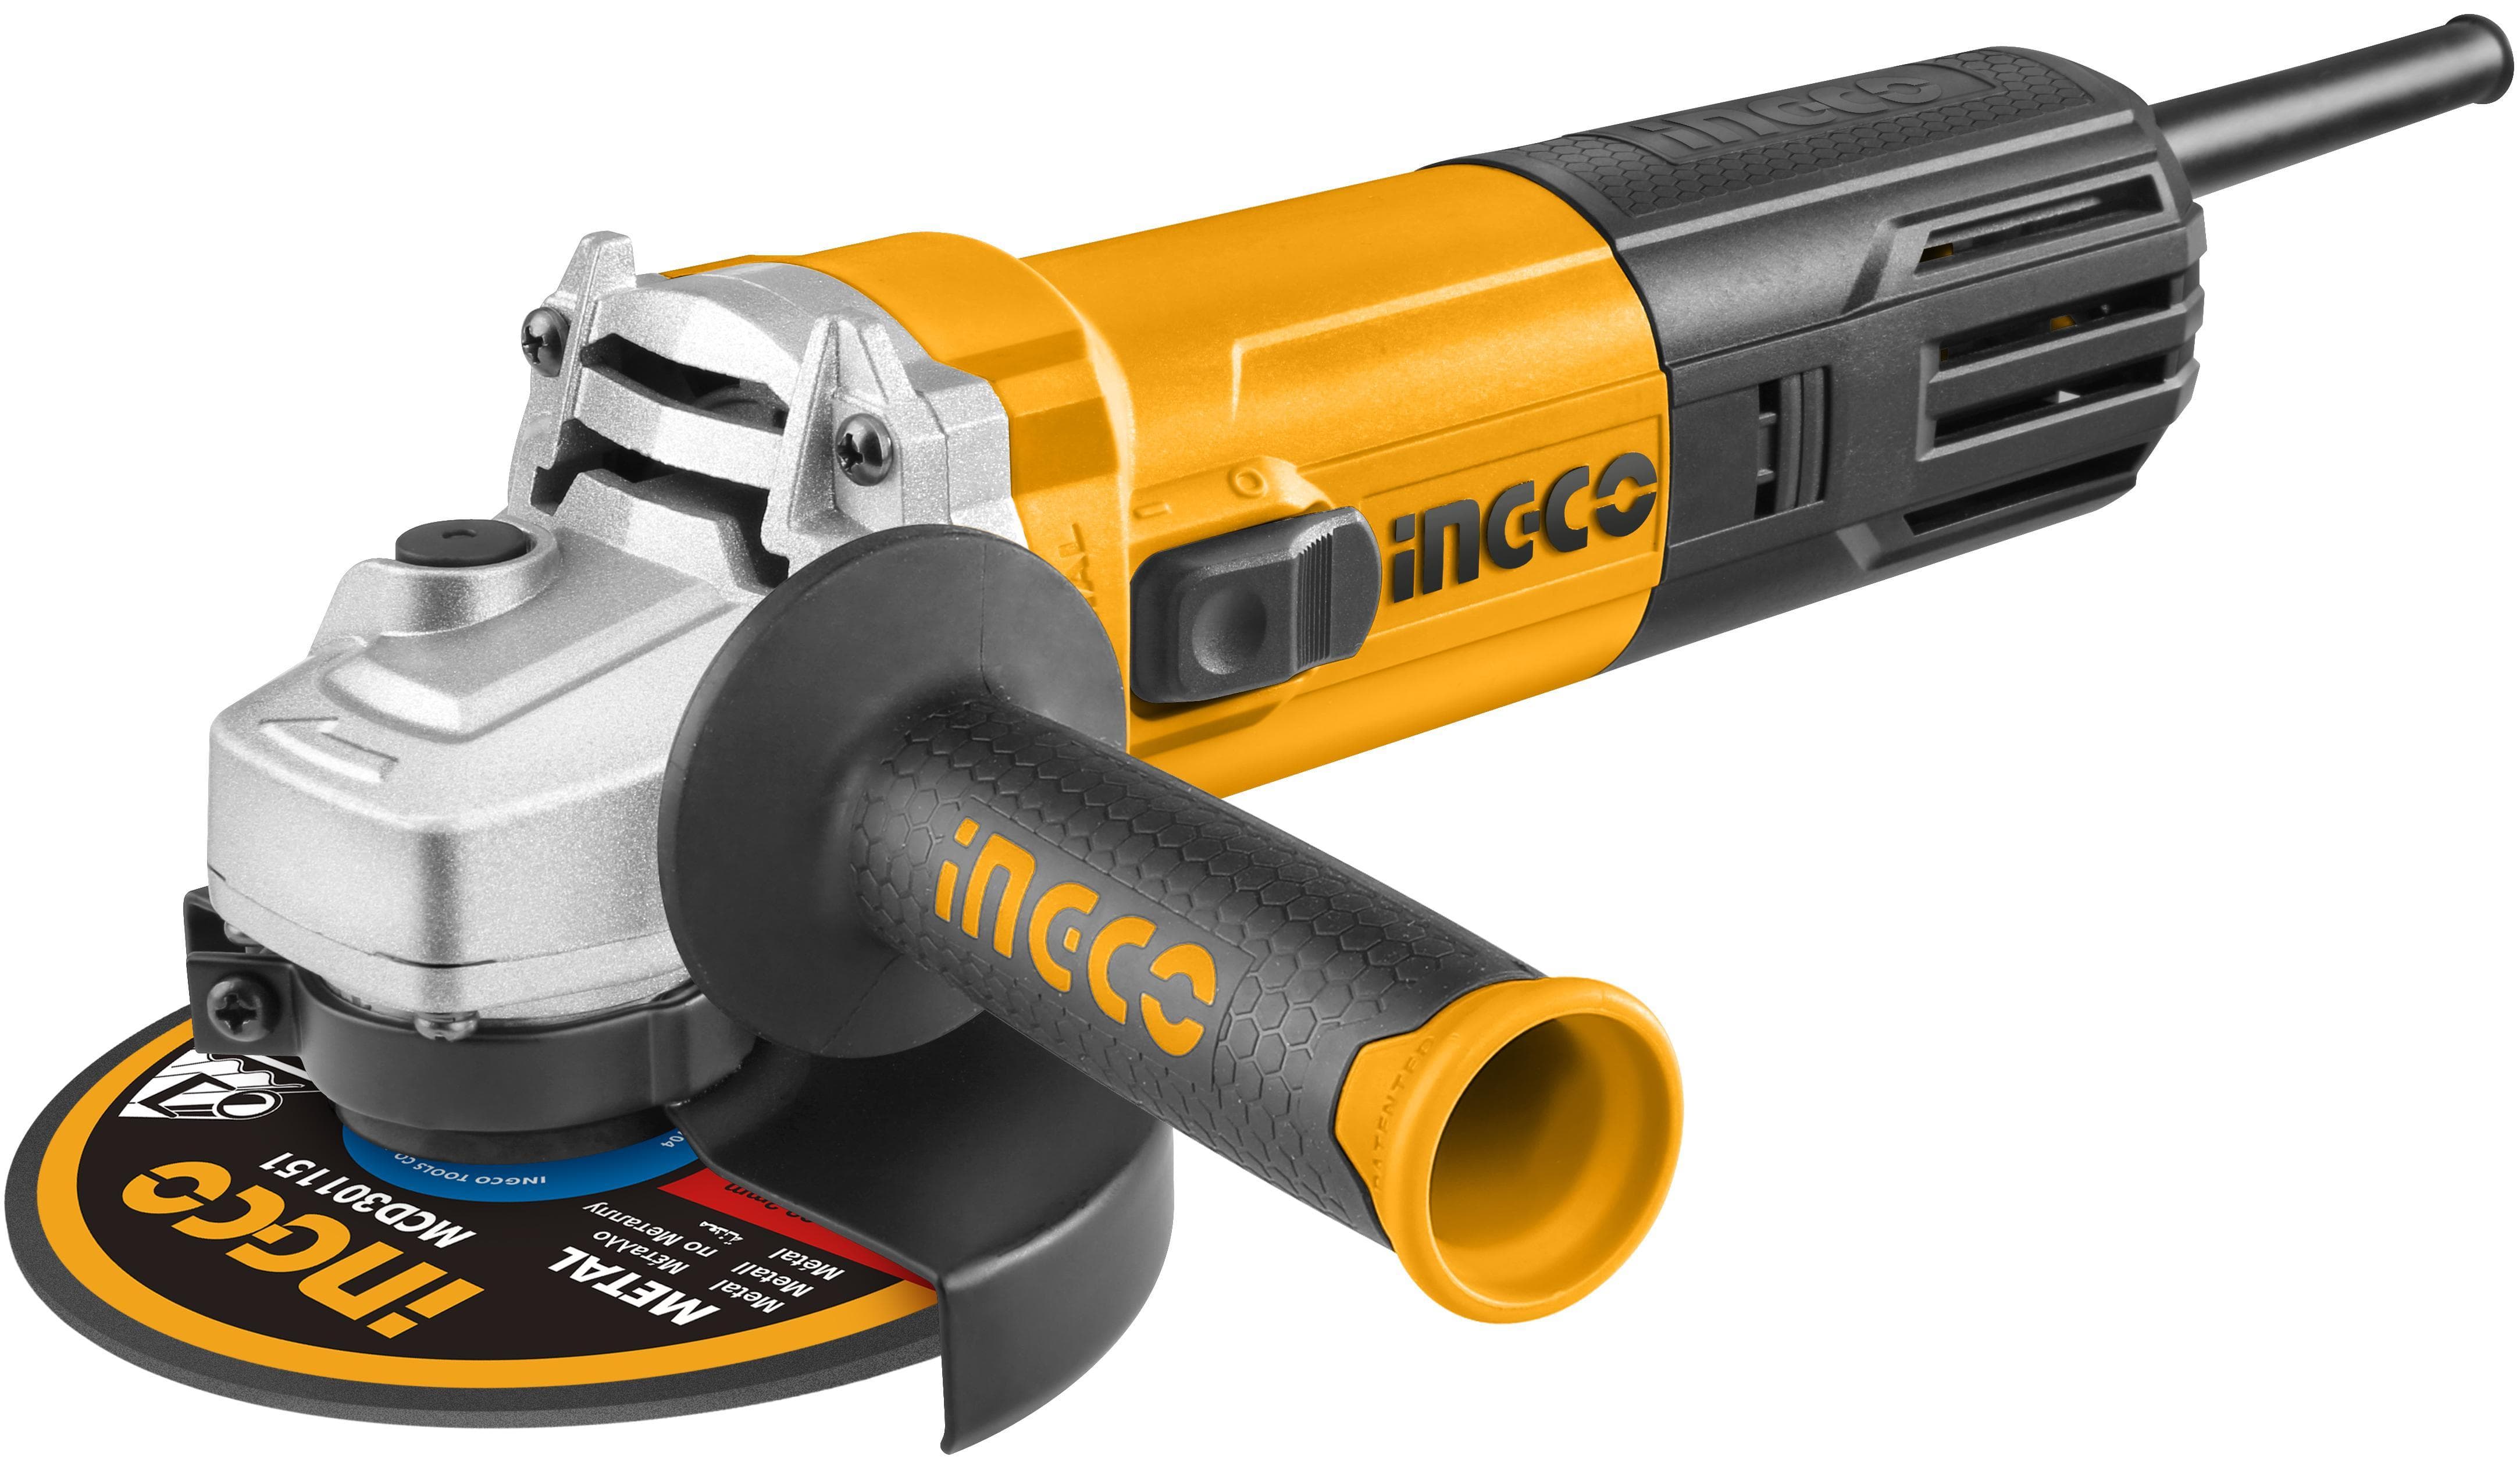 Ingco 5"/100mm Angle Grinder 950W - AG95018 | Supply Master | Accra, Ghana Tools Building Steel Engineering Hardware tool